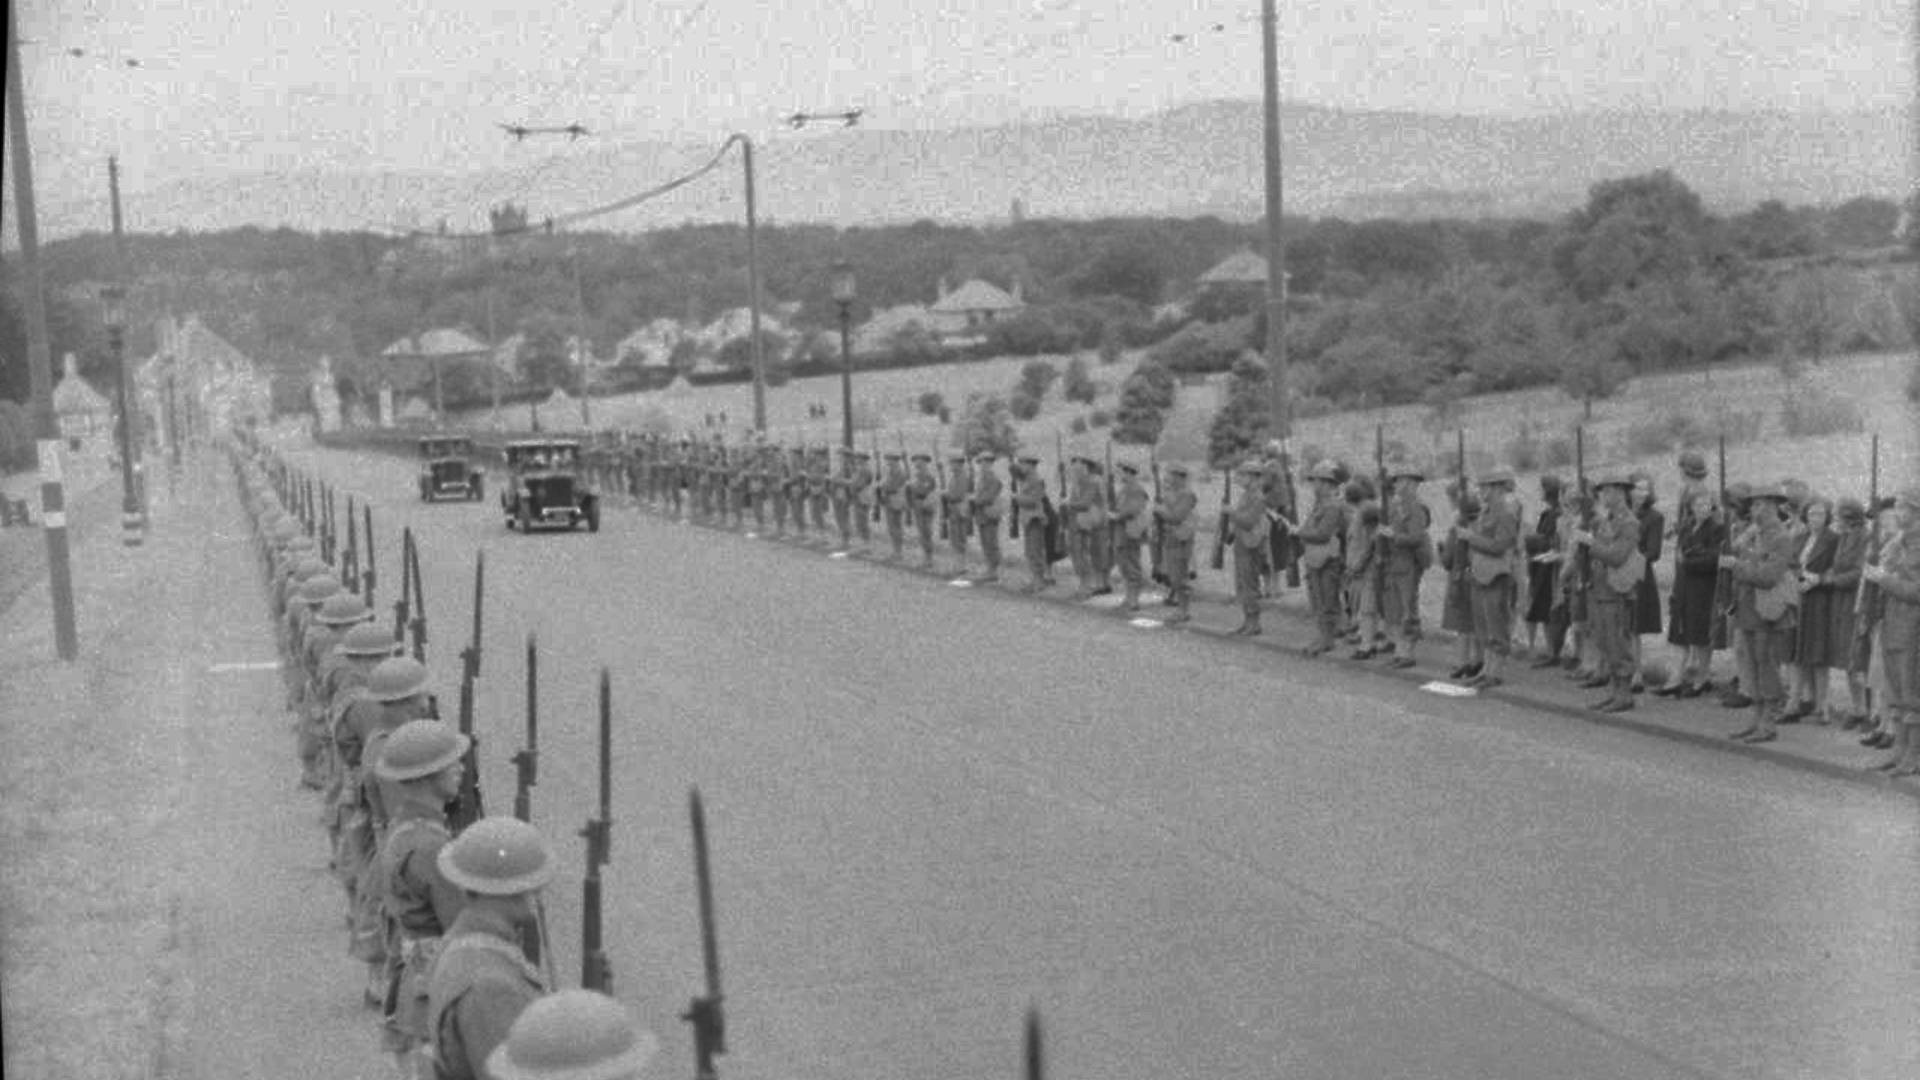 Members of the United States Army wearing British-style Brodie helmets form a guard of honour along the route to Parliament Buildings in the Stormont Estate, Belfast.